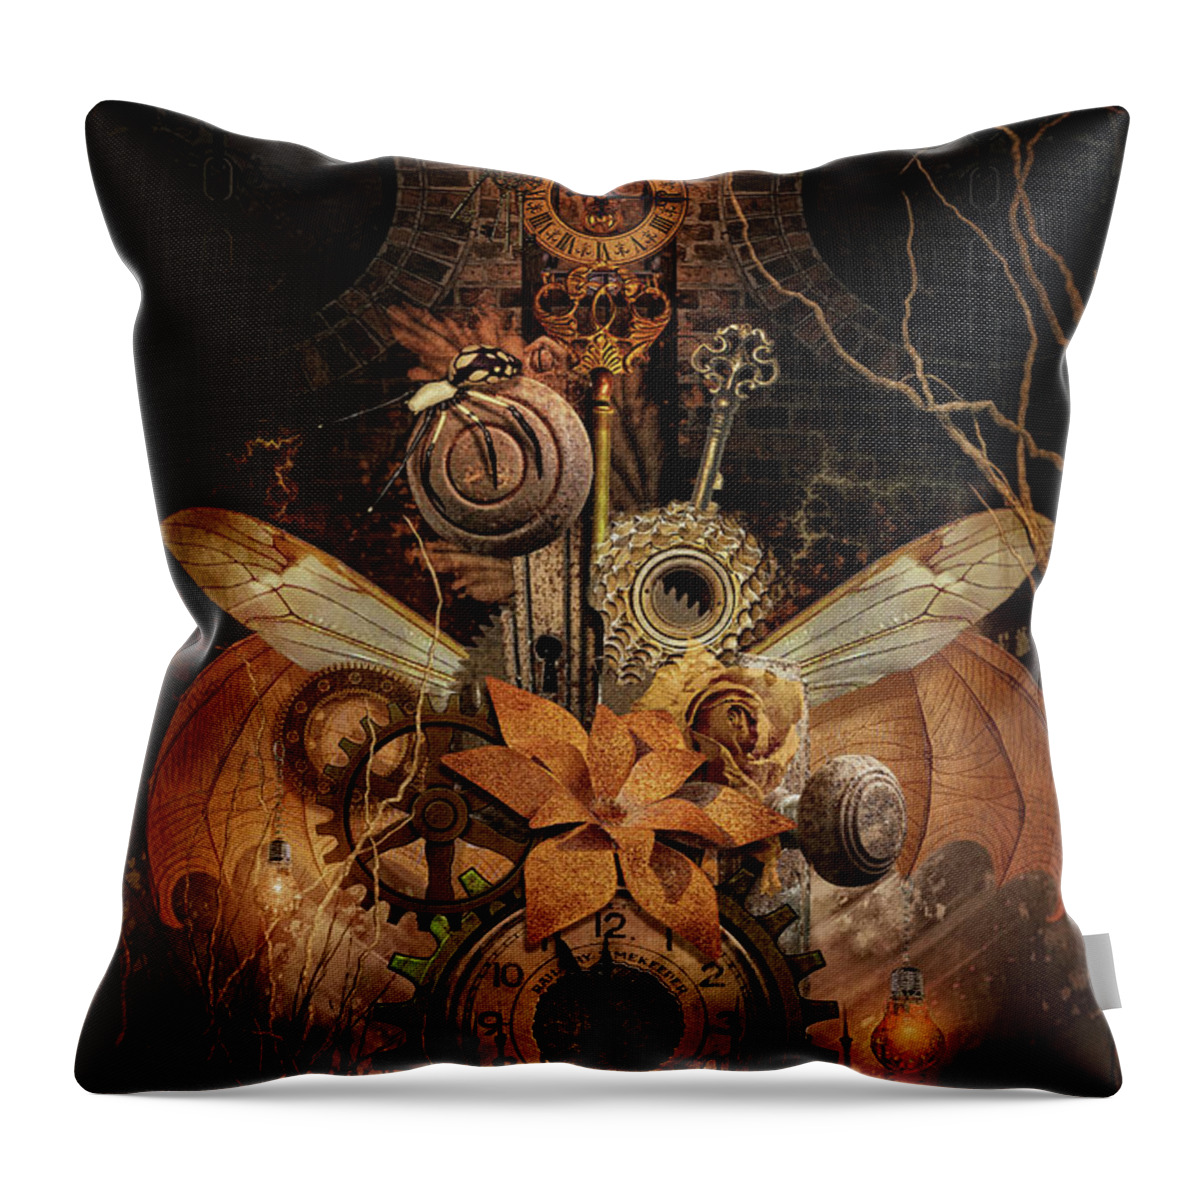 Steampunk Throw Pillow featuring the digital art Geared to Fly by Merrilee Soberg